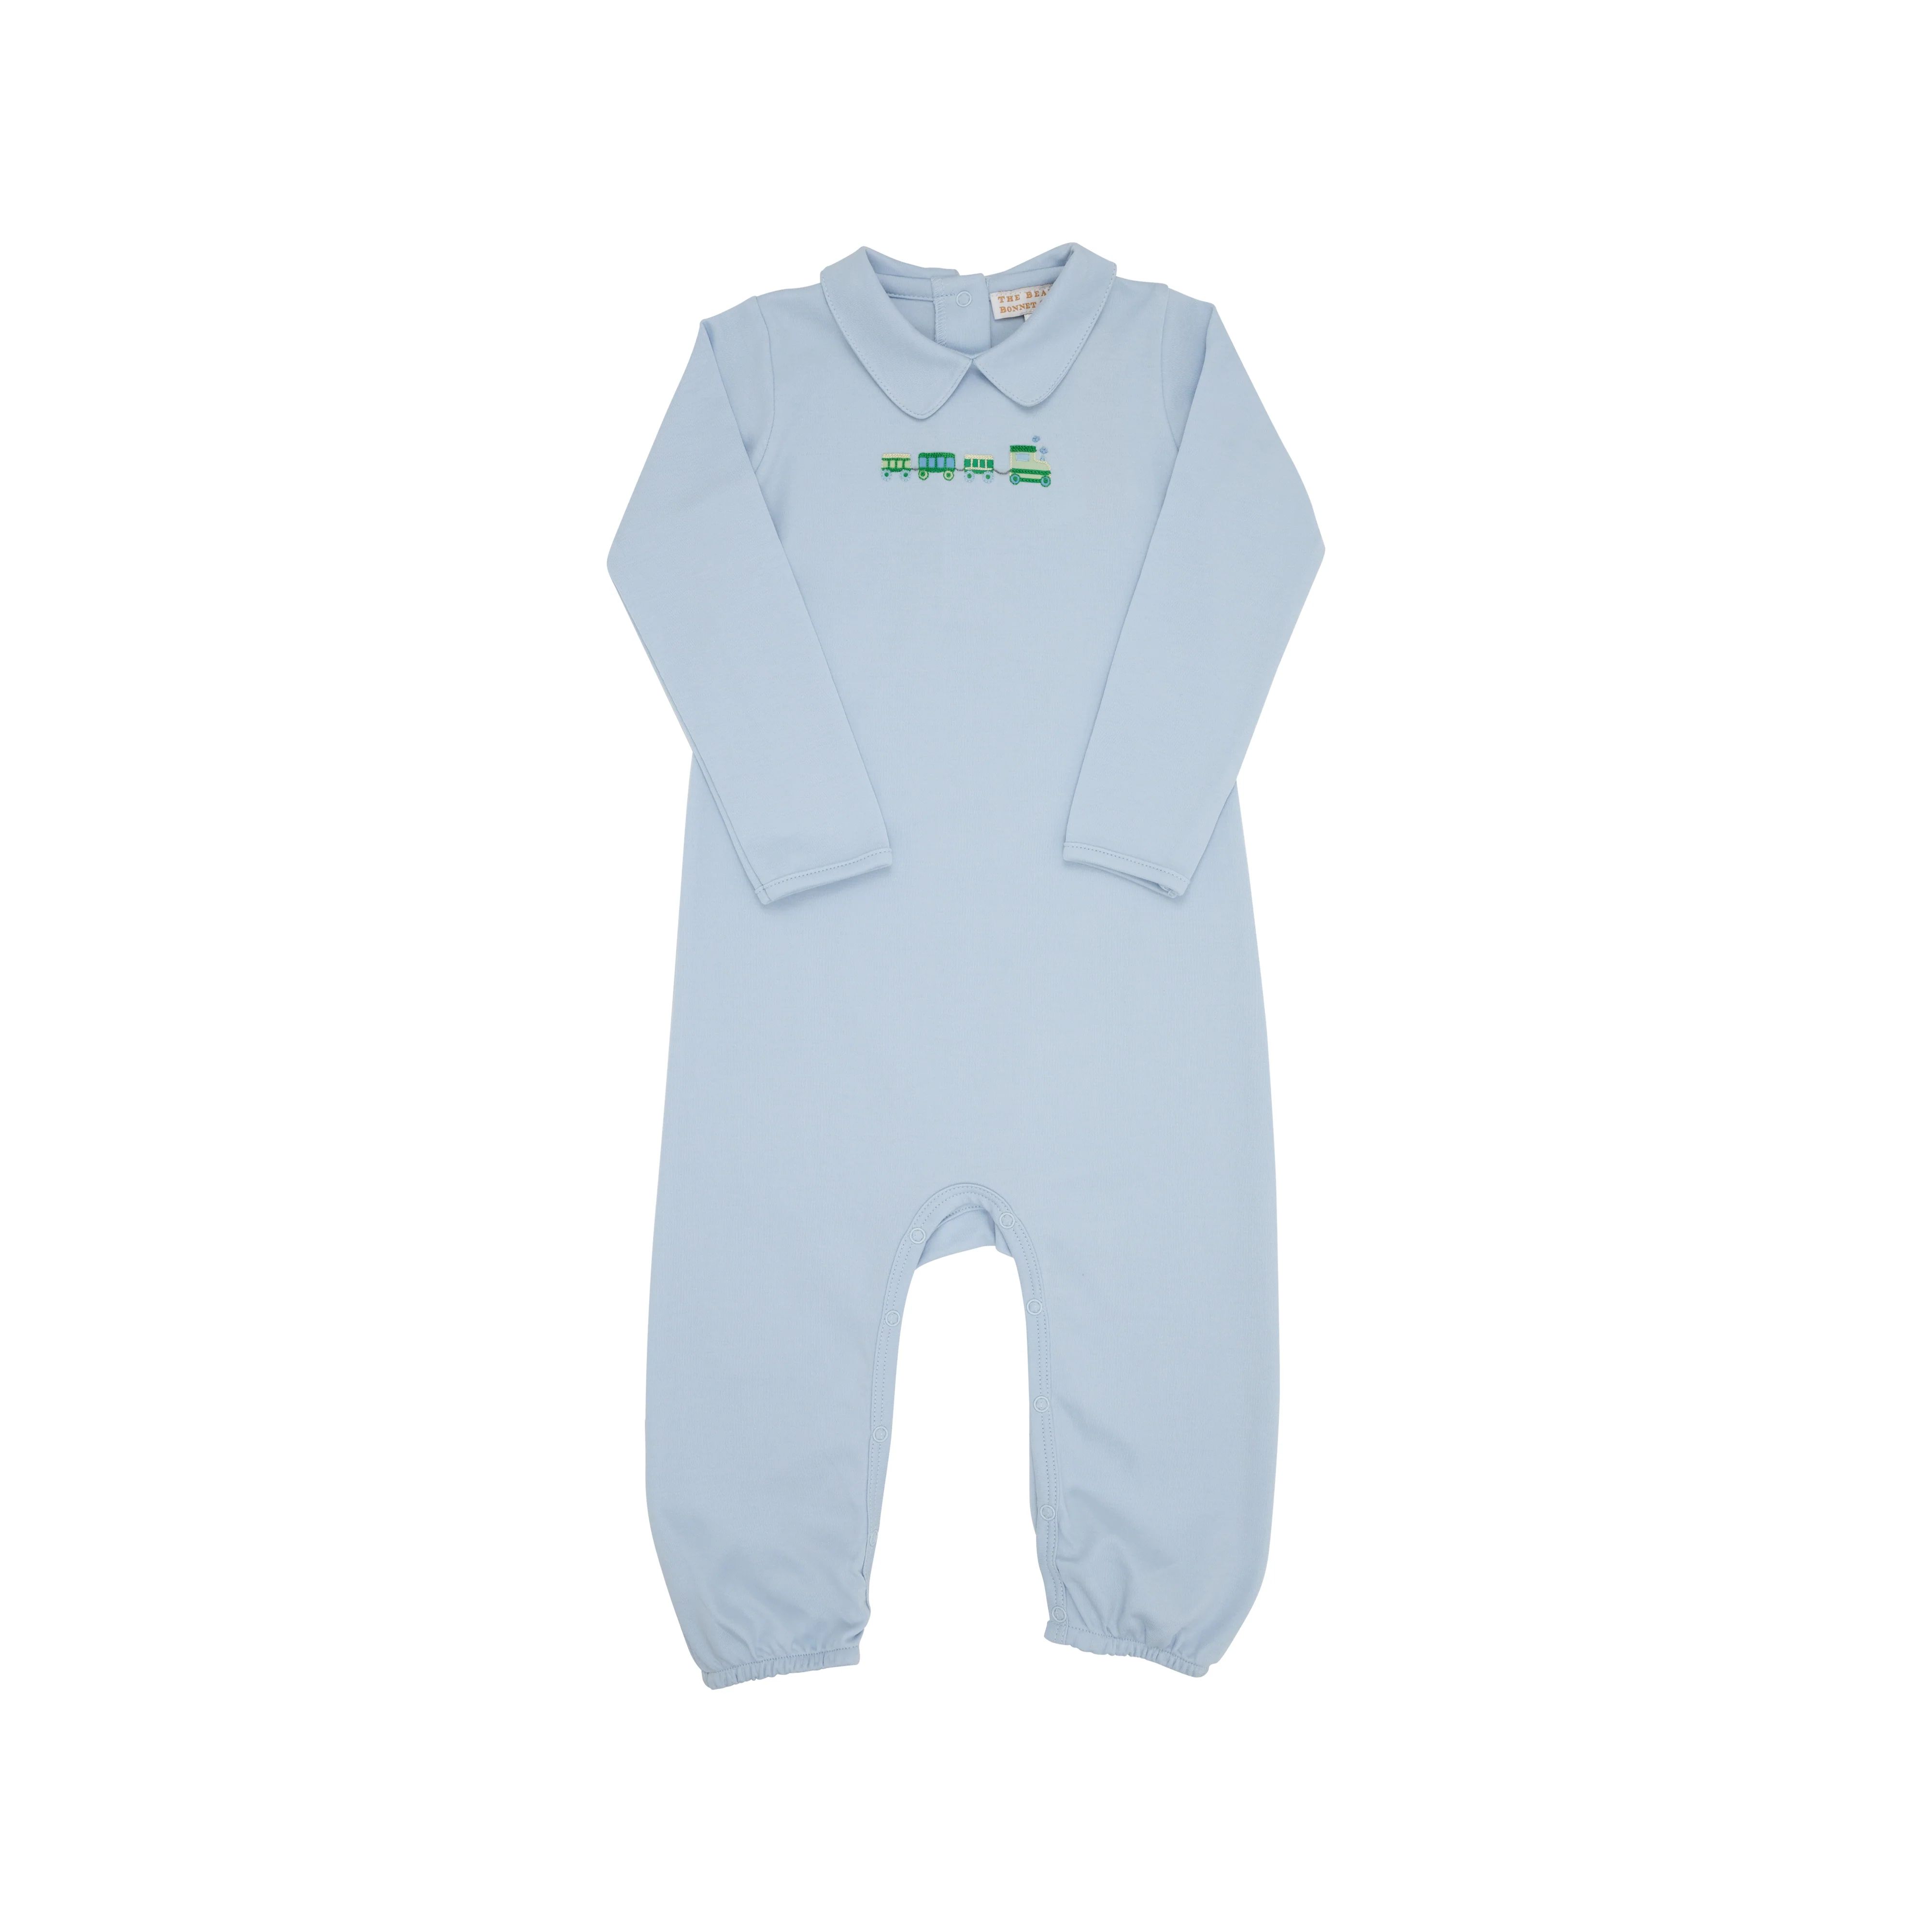 Rigsby Romper - Buckhead Blue with Train Embroidery | The Beaufort Bonnet Company